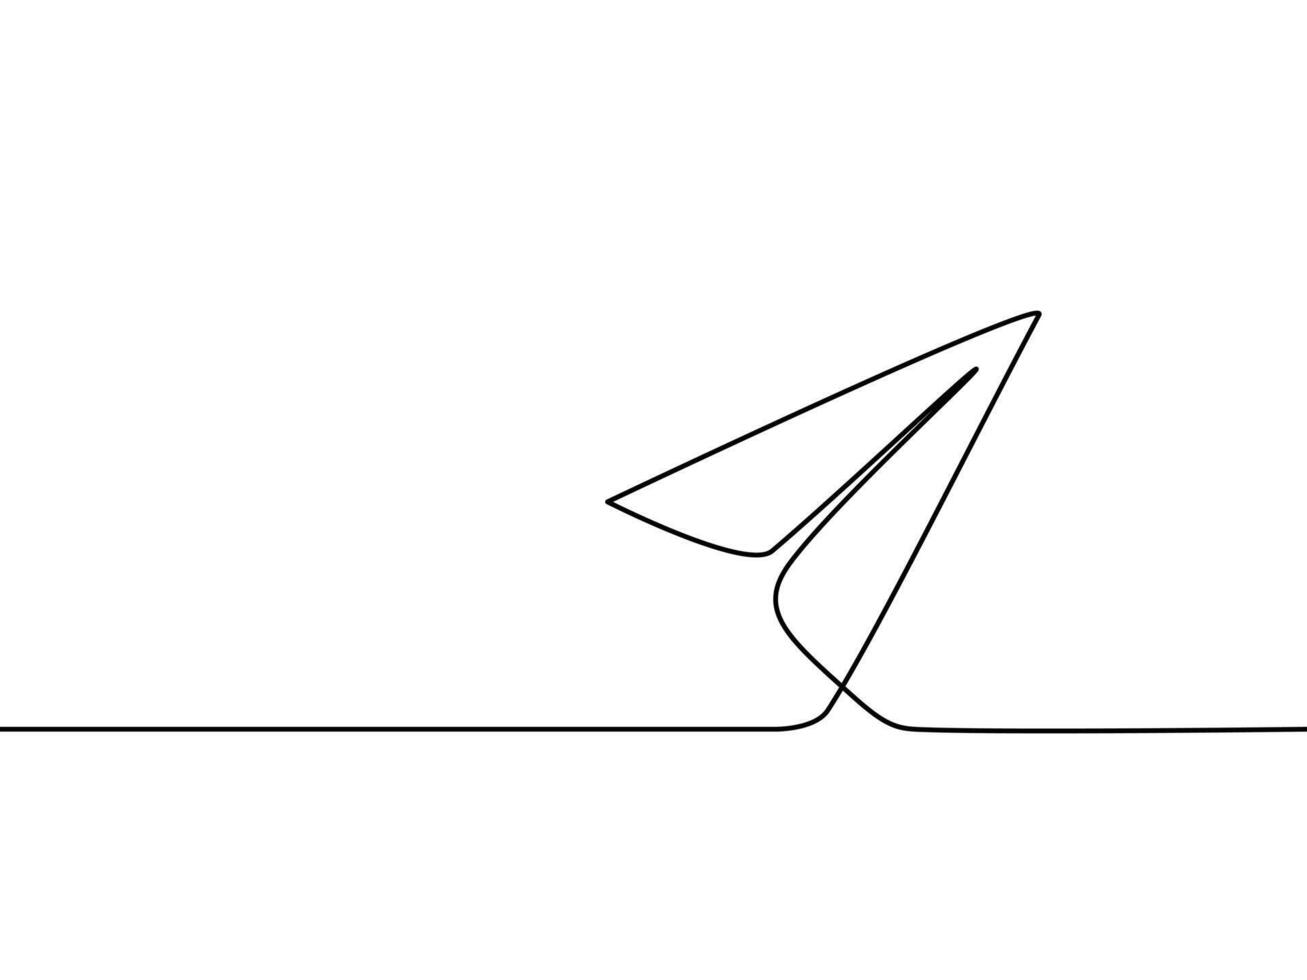 Continuous line drawing of a paper plane vector